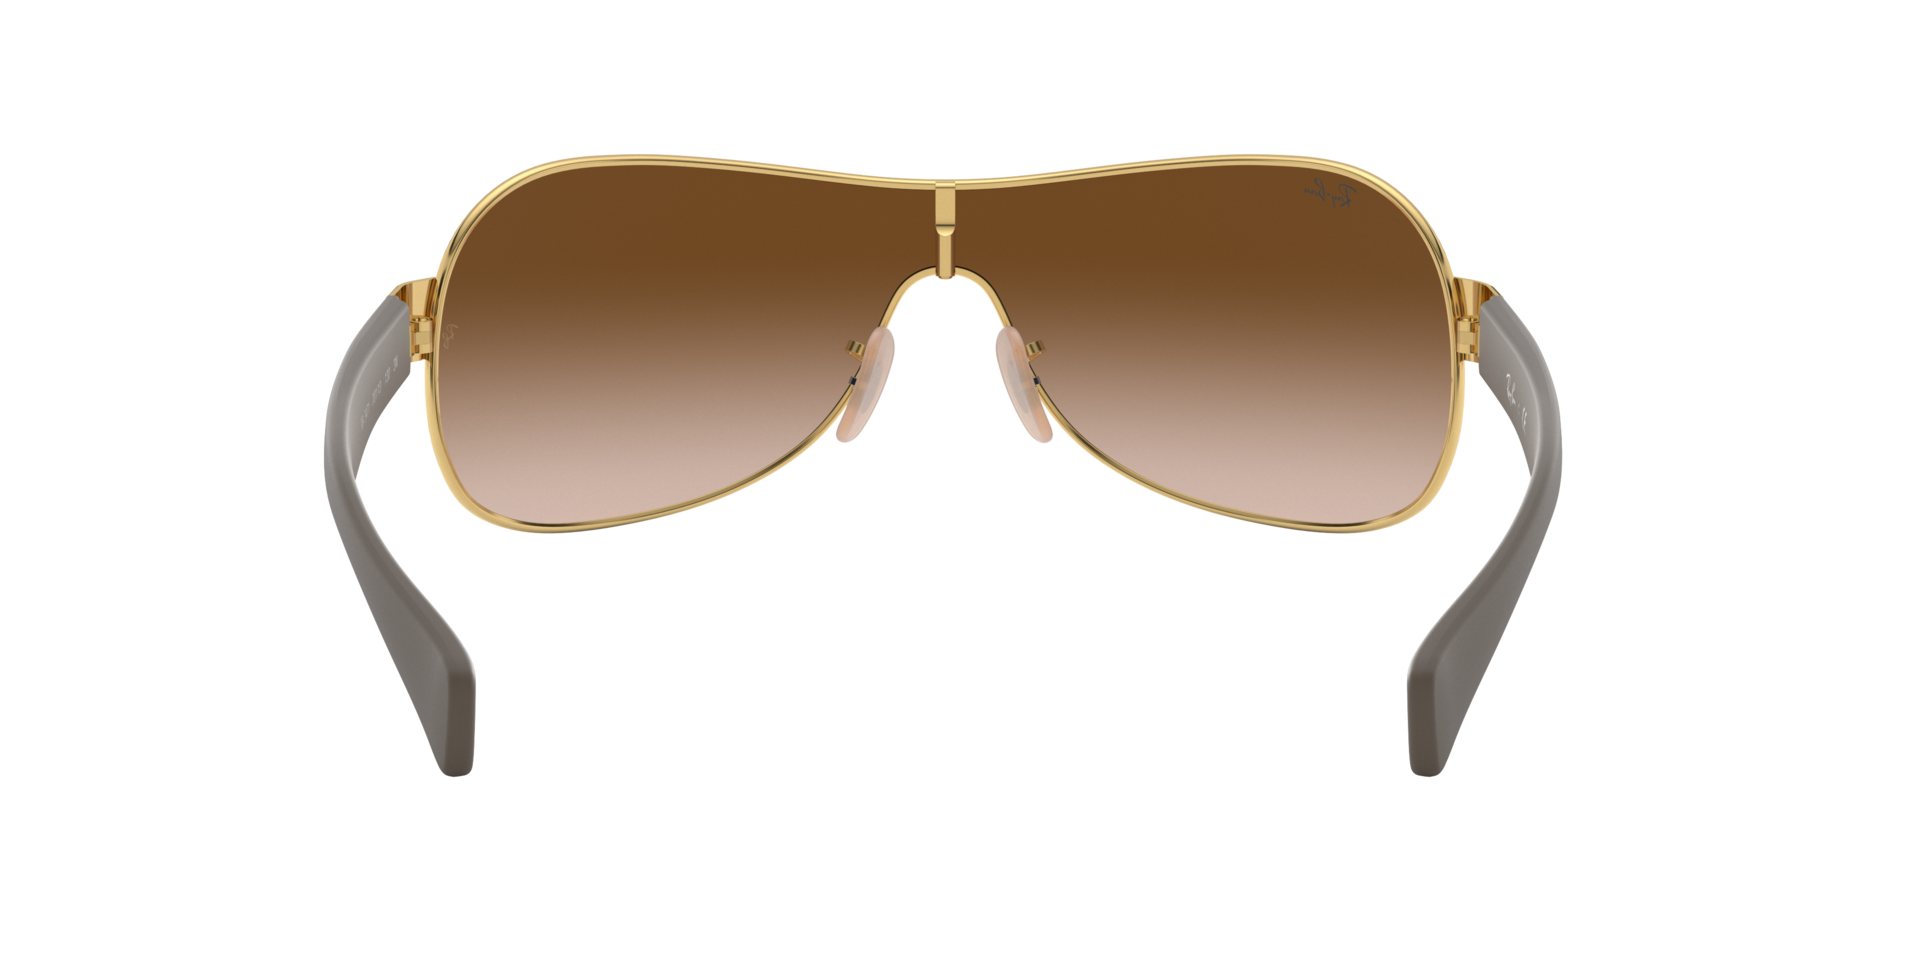 Buy Ray-Ban Rb3471 Sunglasses Online.